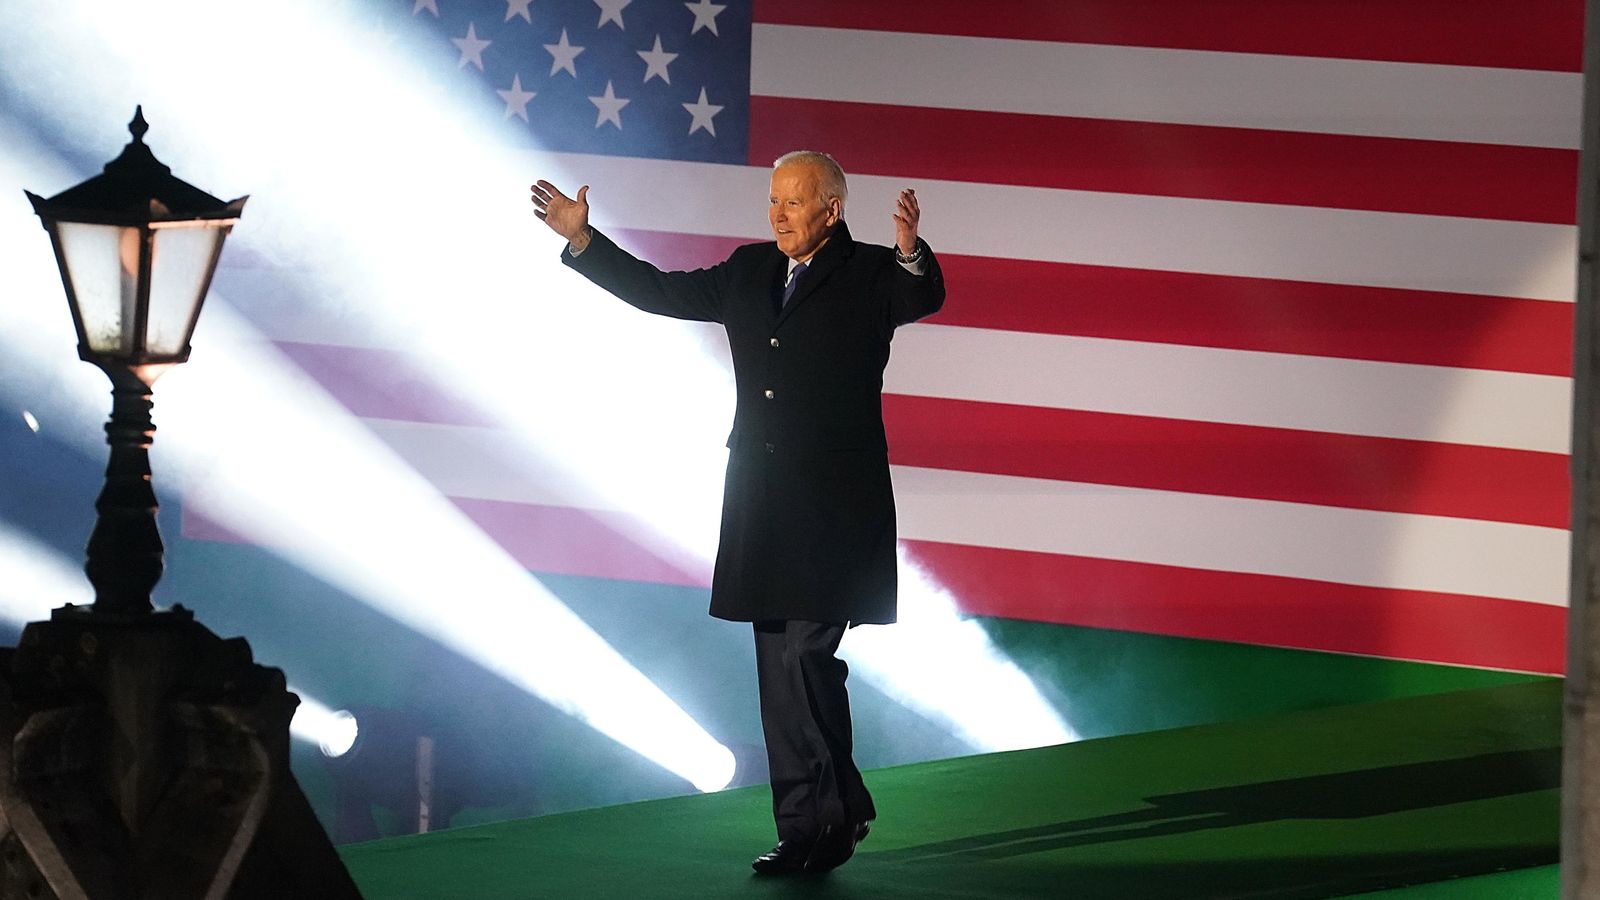 Joe Biden brings his emotional tour of Ireland to a close with a speech in his ancestral home